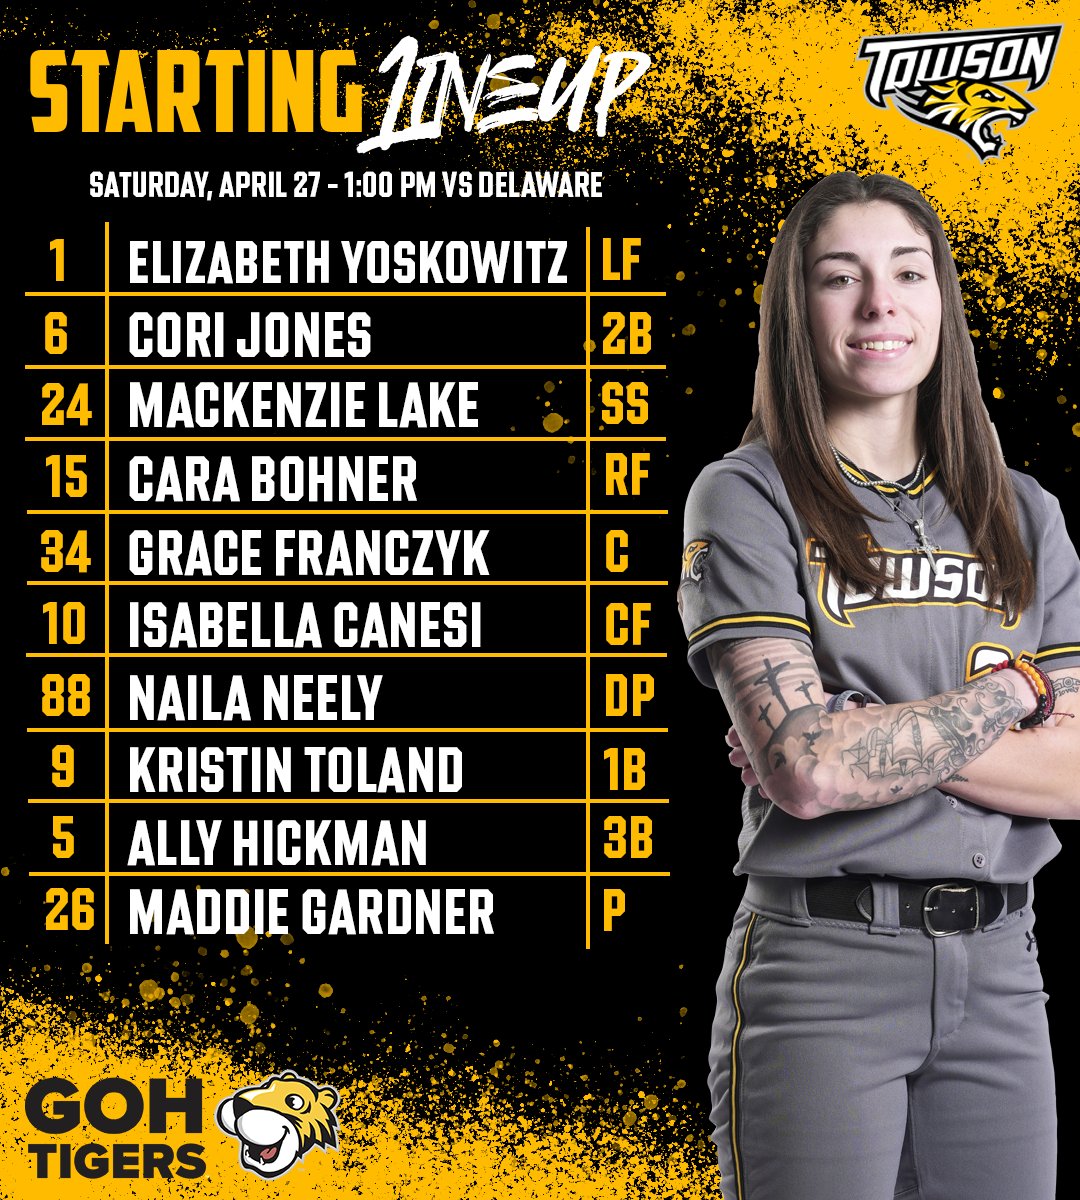 Here is how we lineup for game two against the Blue Hens #GohTigers